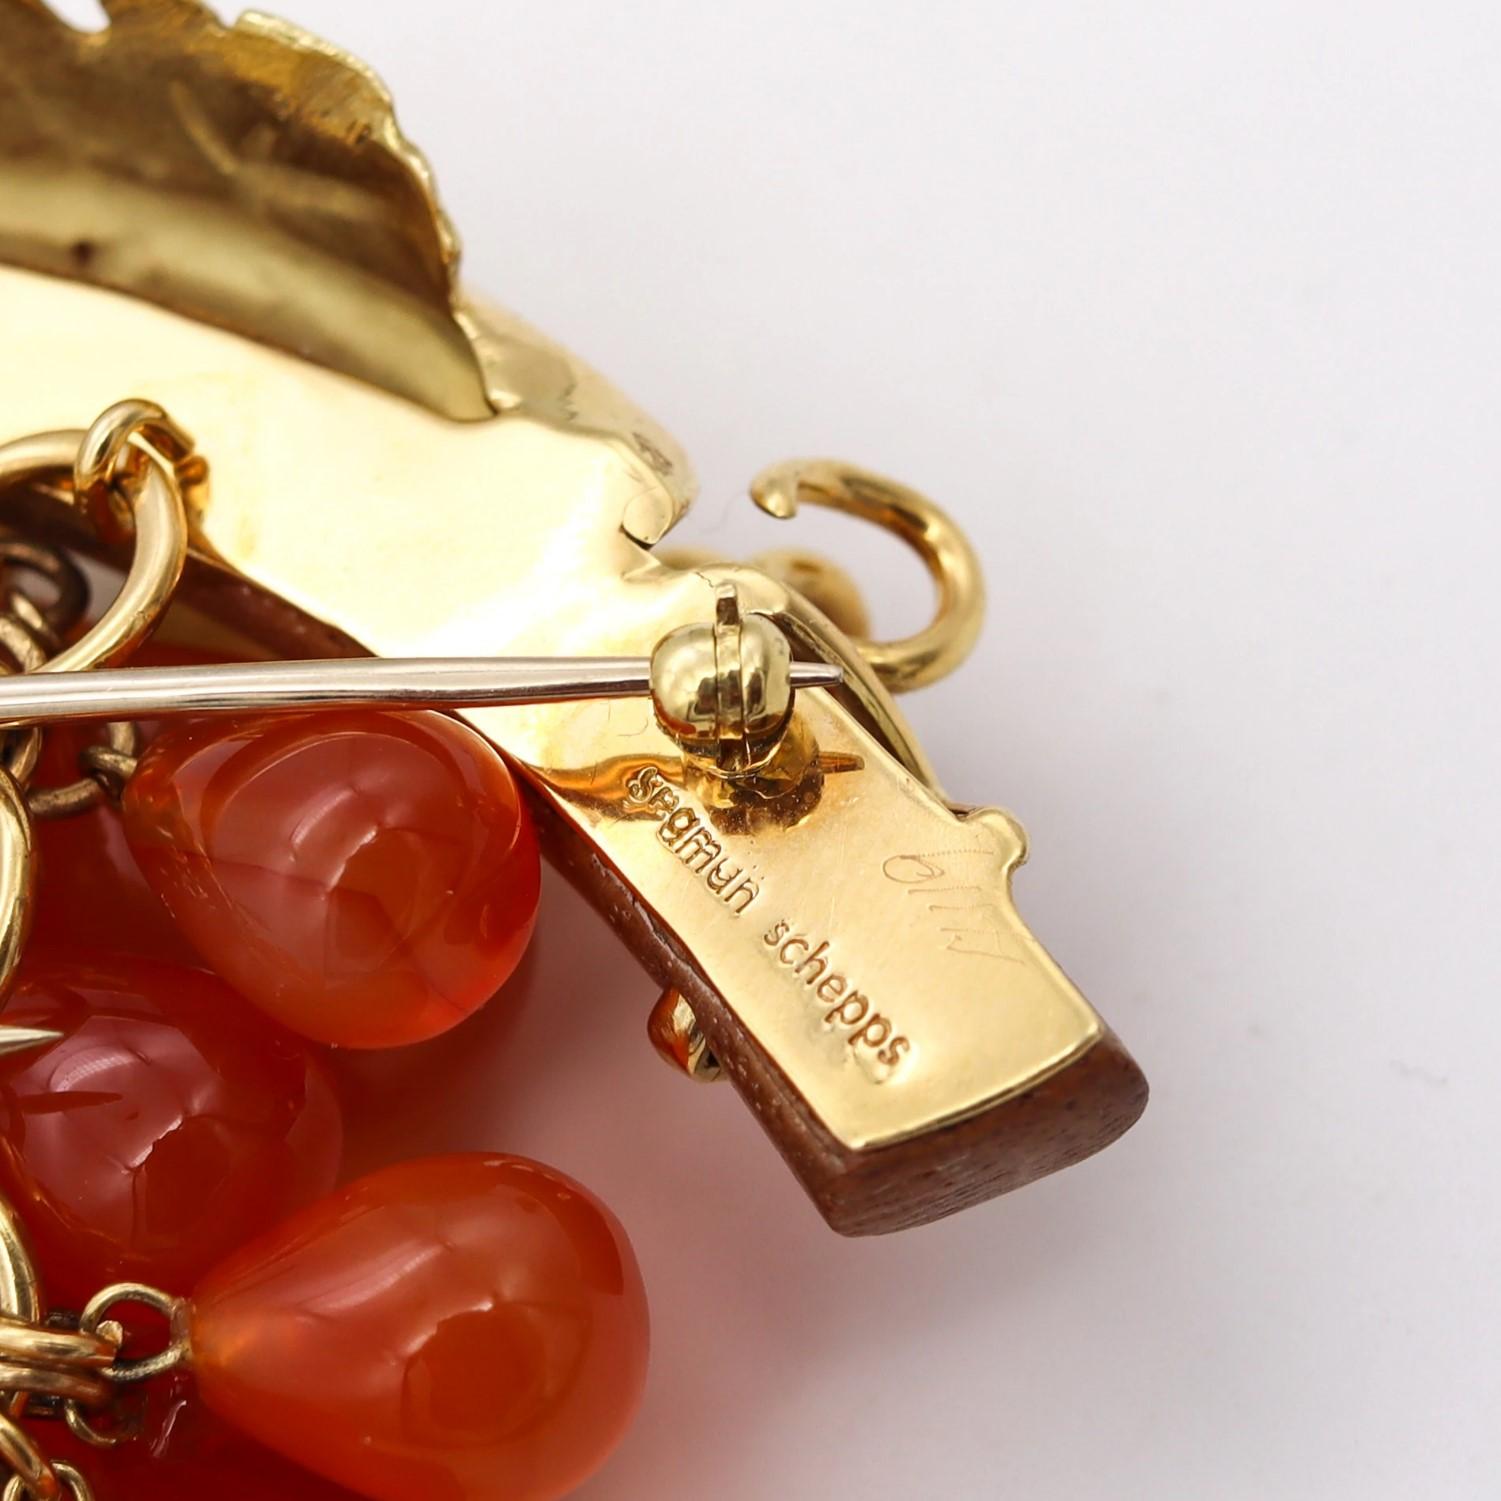 Modernist Seaman Schepps 1970 New York Grapes Brooch In 18Kt Gold With Wood & Carnelian For Sale